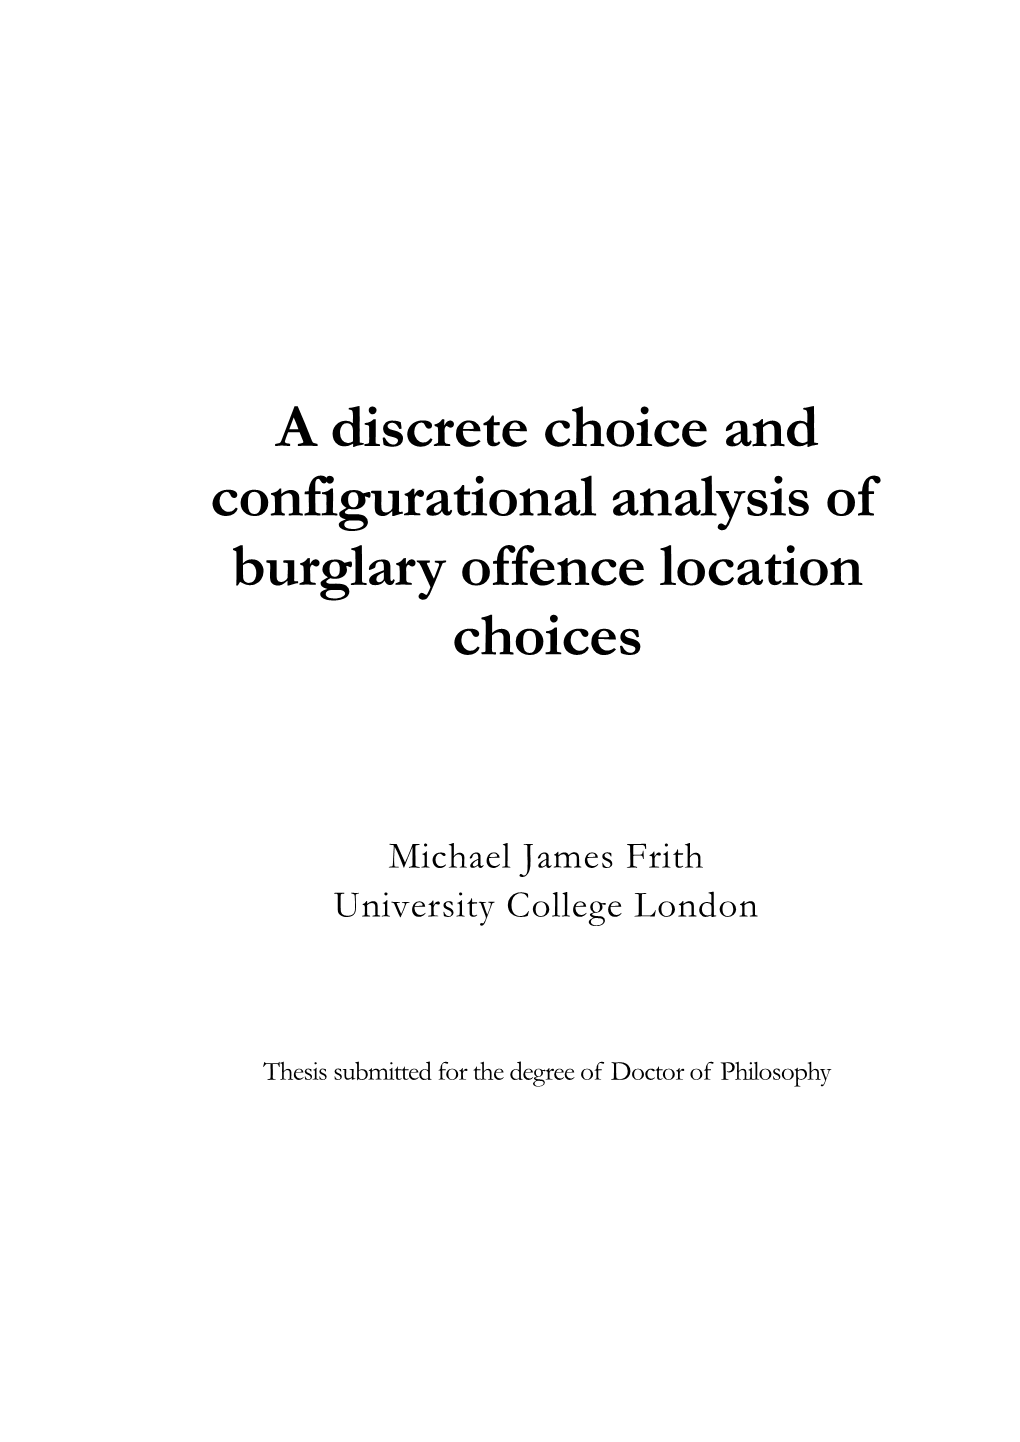 A Discrete Choice and Configurational Analysis of Burglary Offence Location Choices